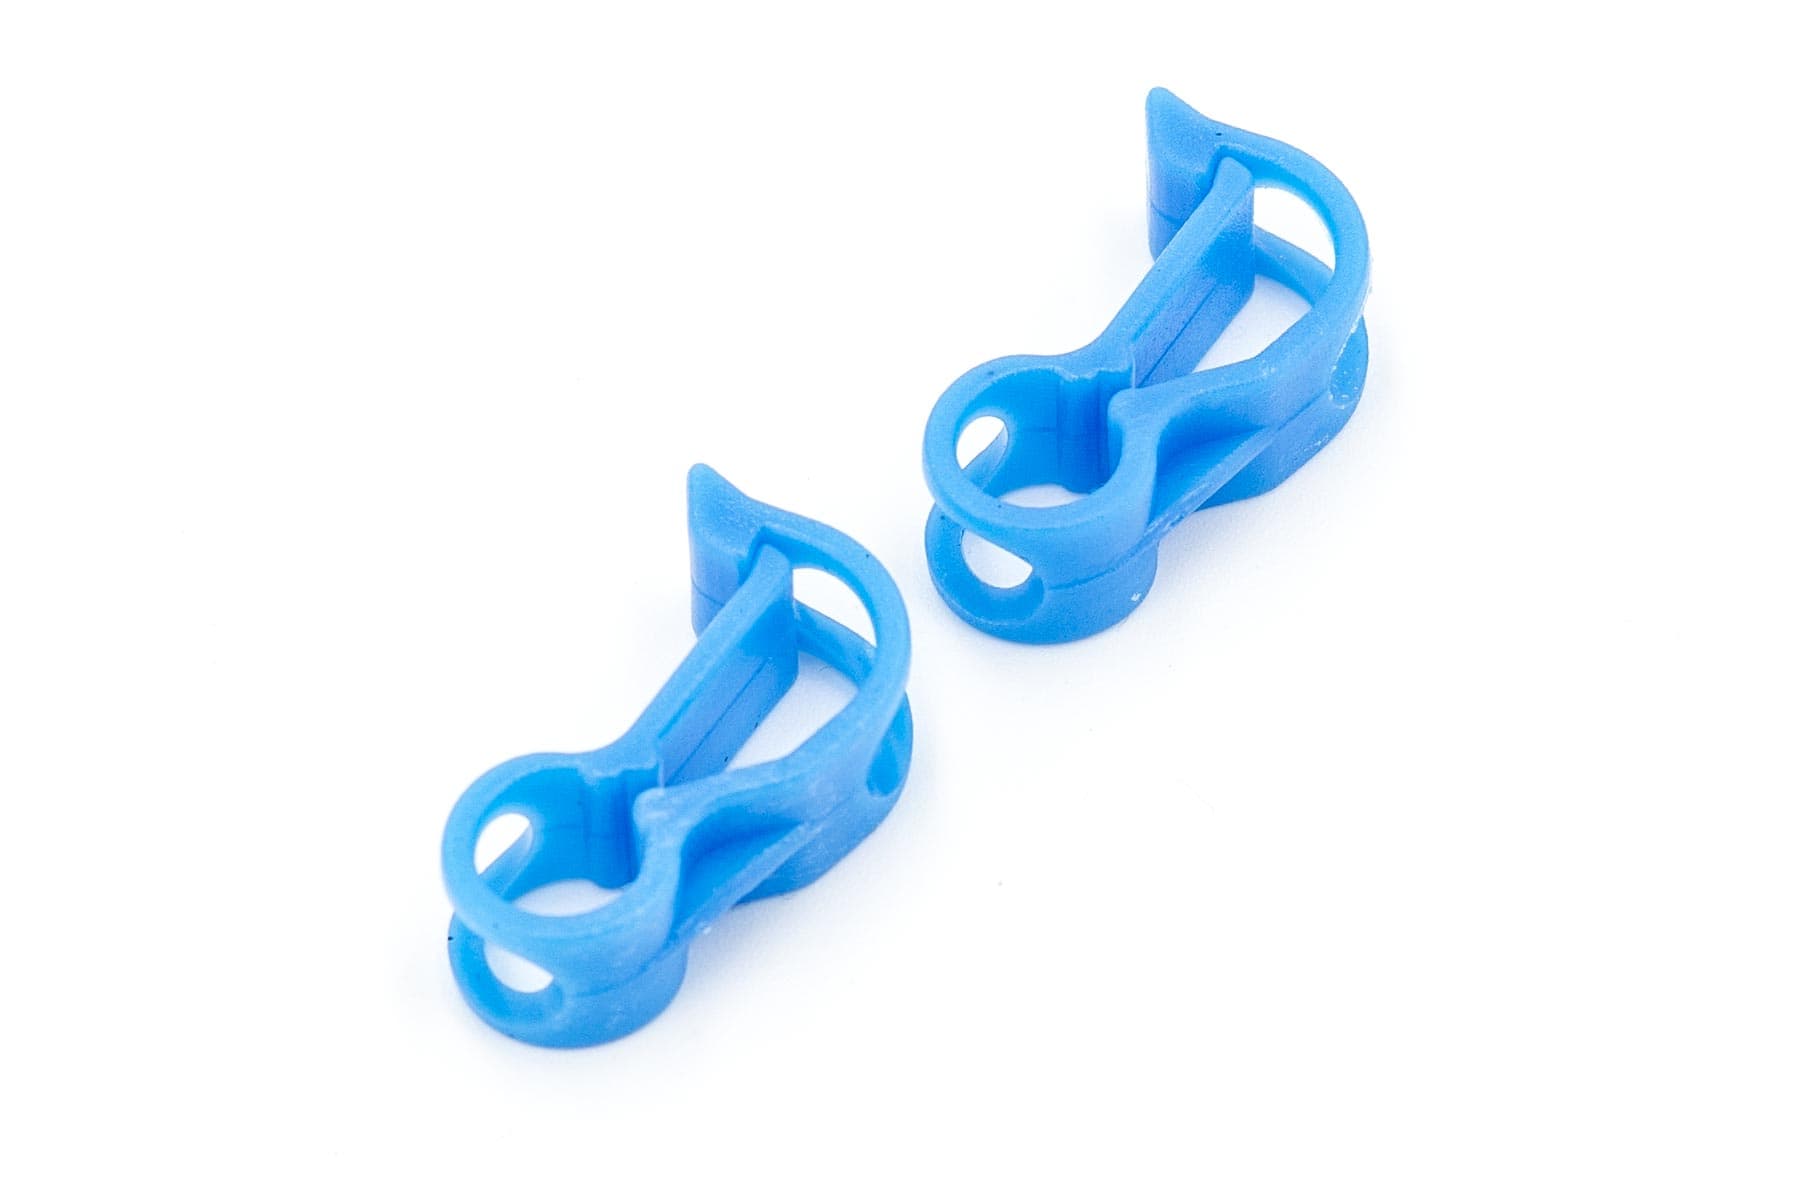 BenchCraft 5mm Fuel Tube Clamp - Blue (2 Pack) BCT5031-012